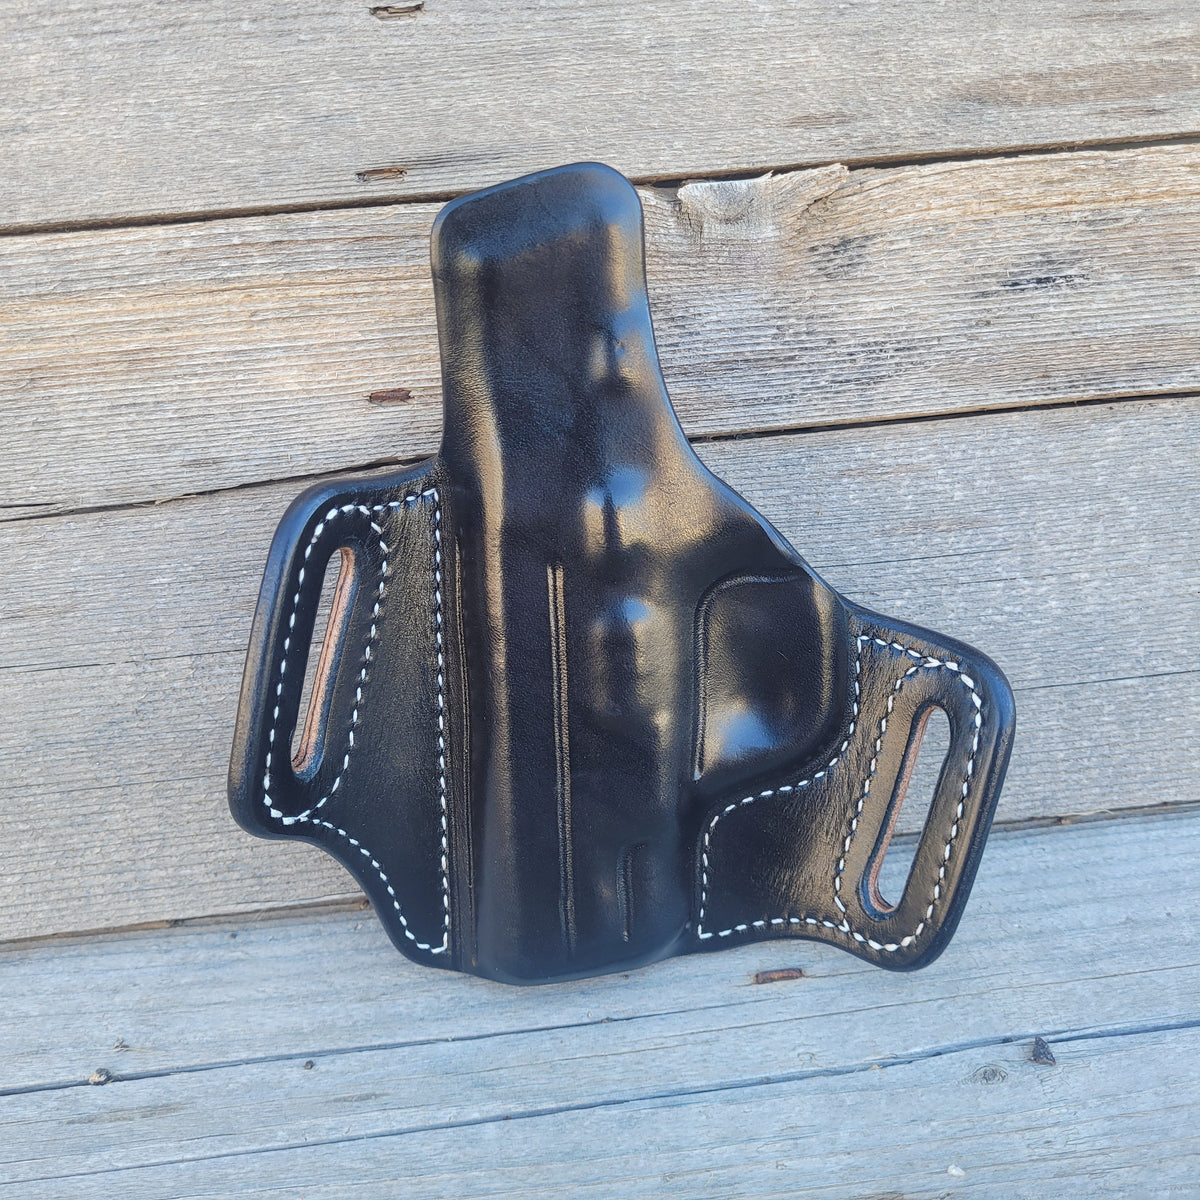 S&W Shield 9mm/40sw Classic Holster All Black, WHite Stitching